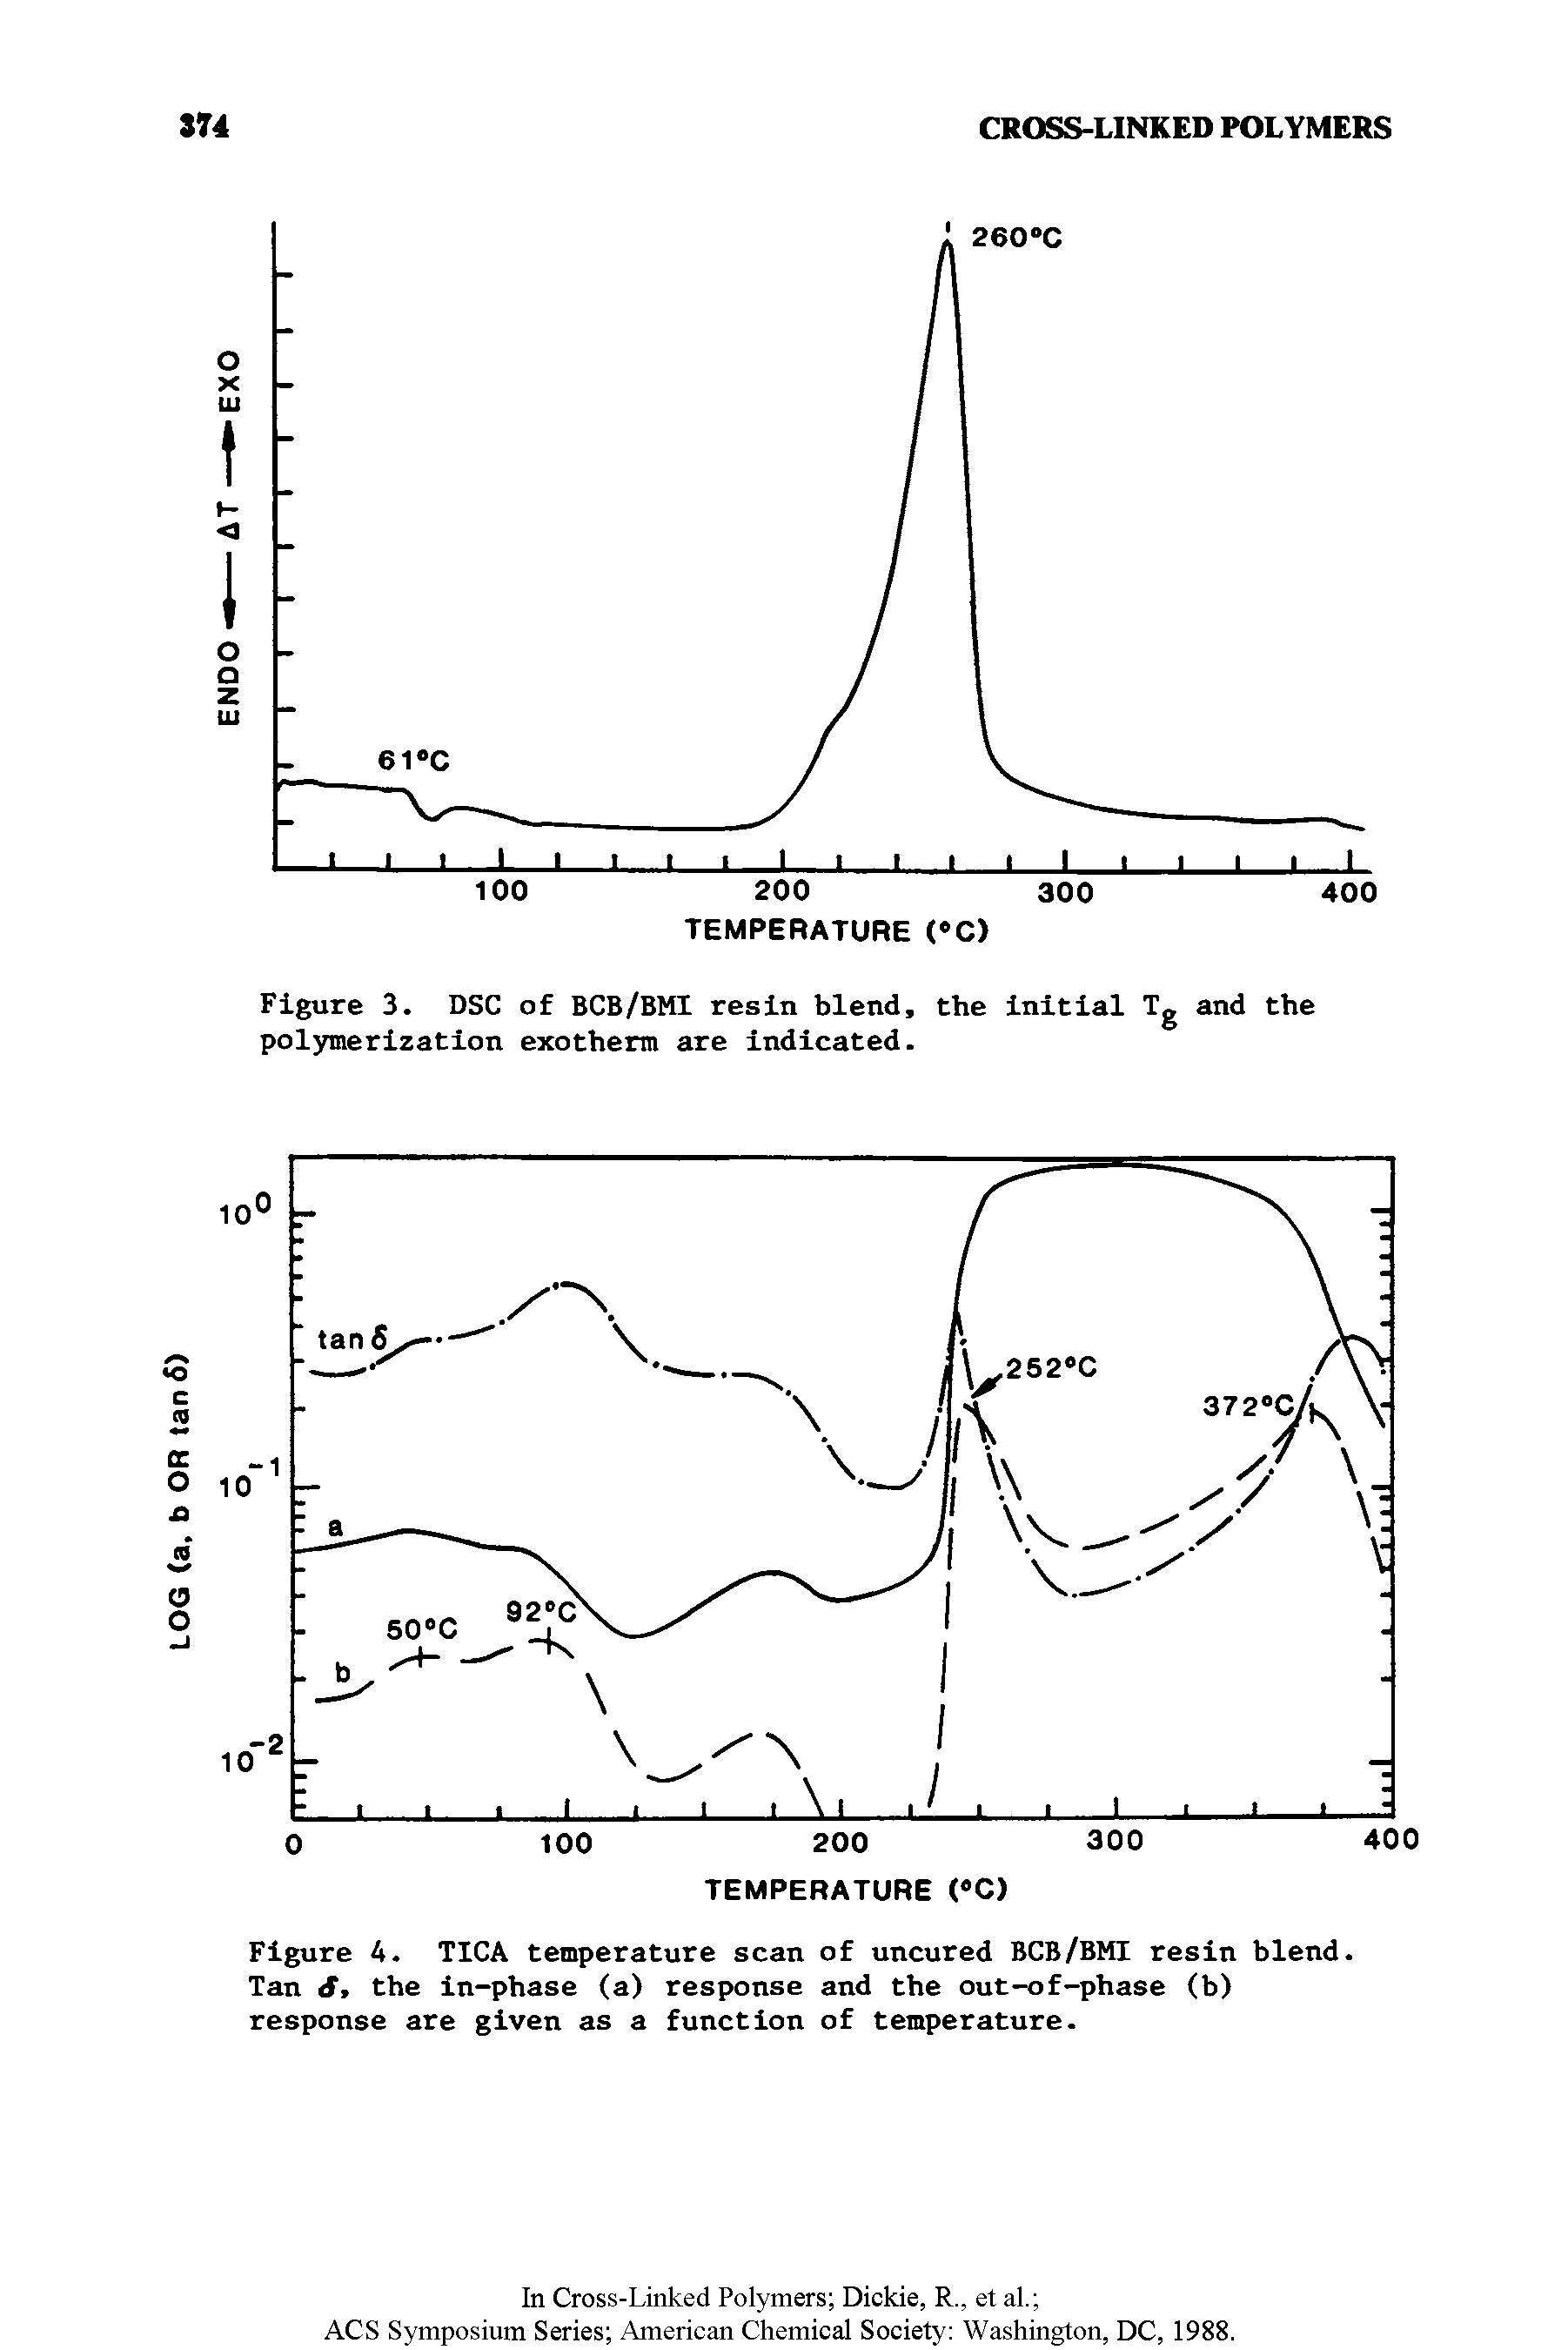 Figure 3. DSC of BCB/BMI resin blend, the initial Tg and the polymerization exotherm are indicated.